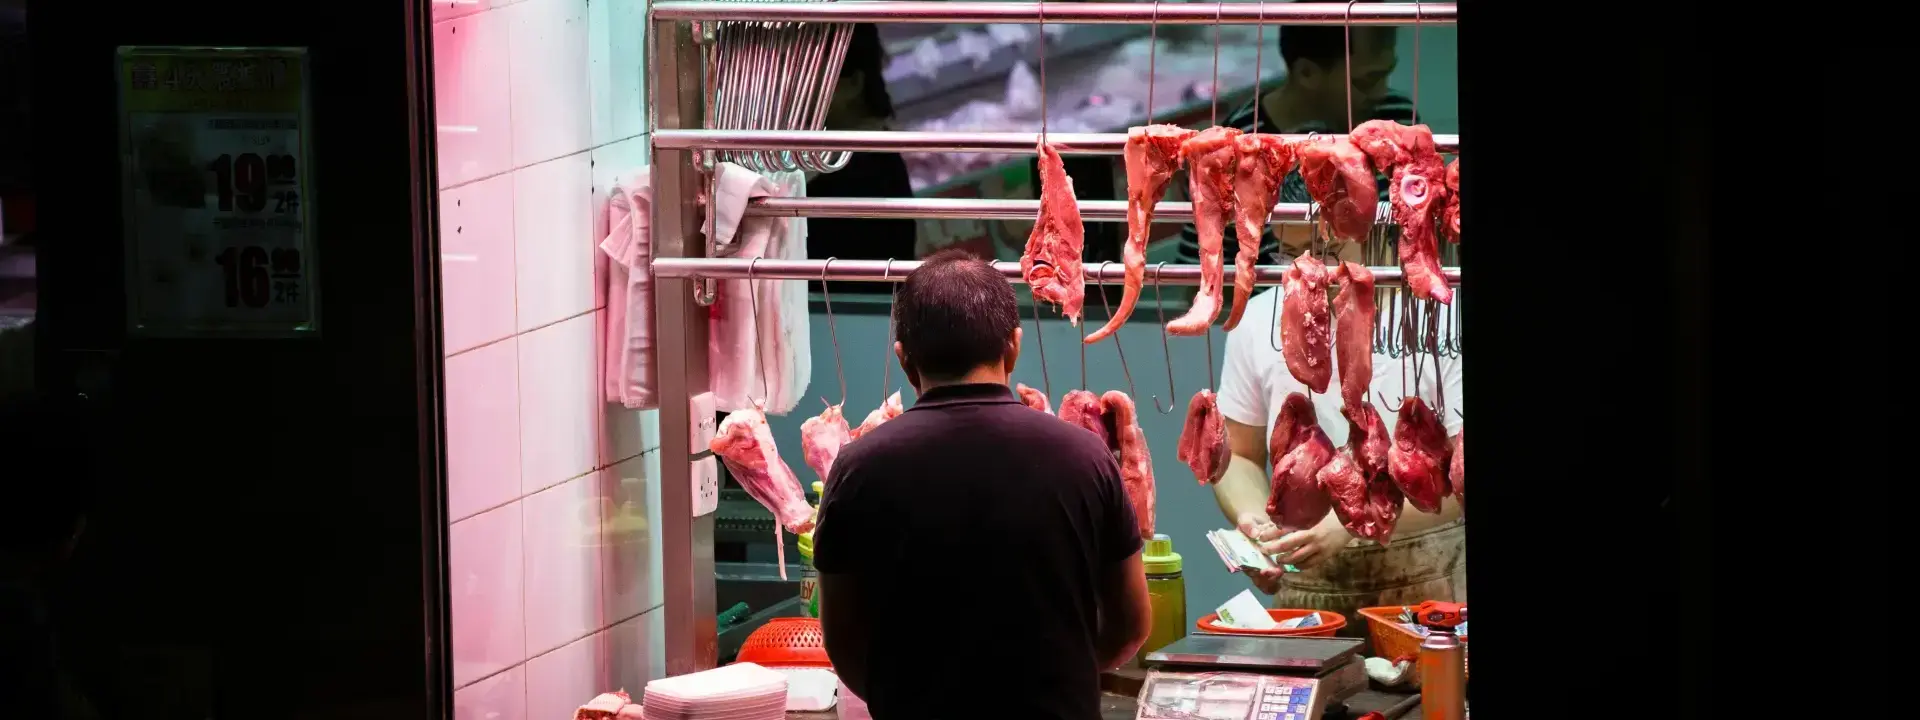 Butcher Staff in Italy